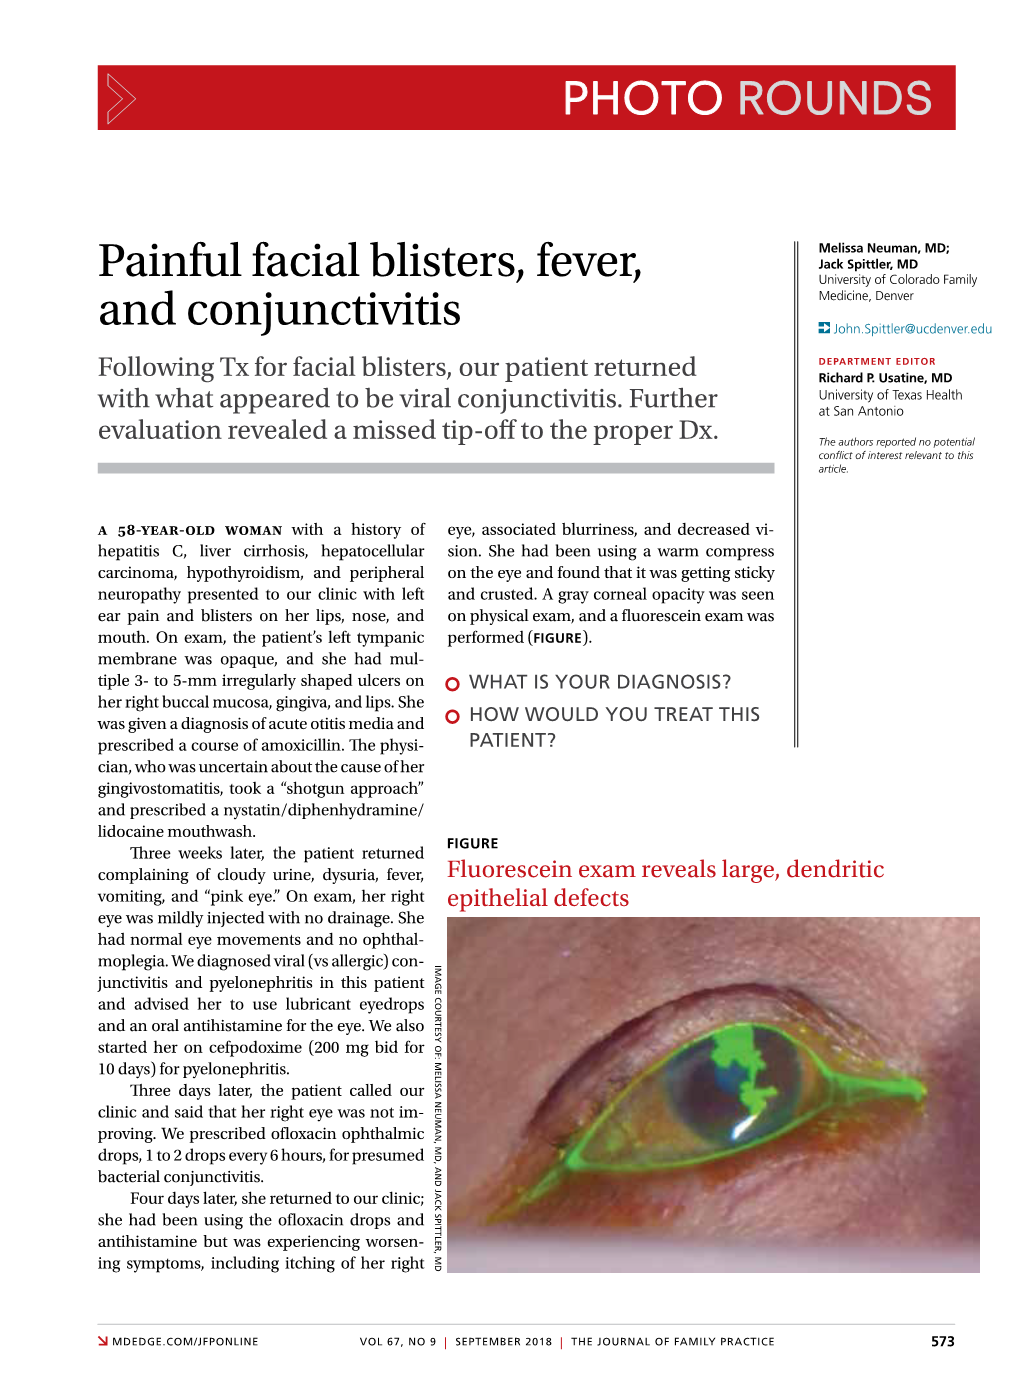 Painful Facial Blisters, Fever, and Conjunctivitis